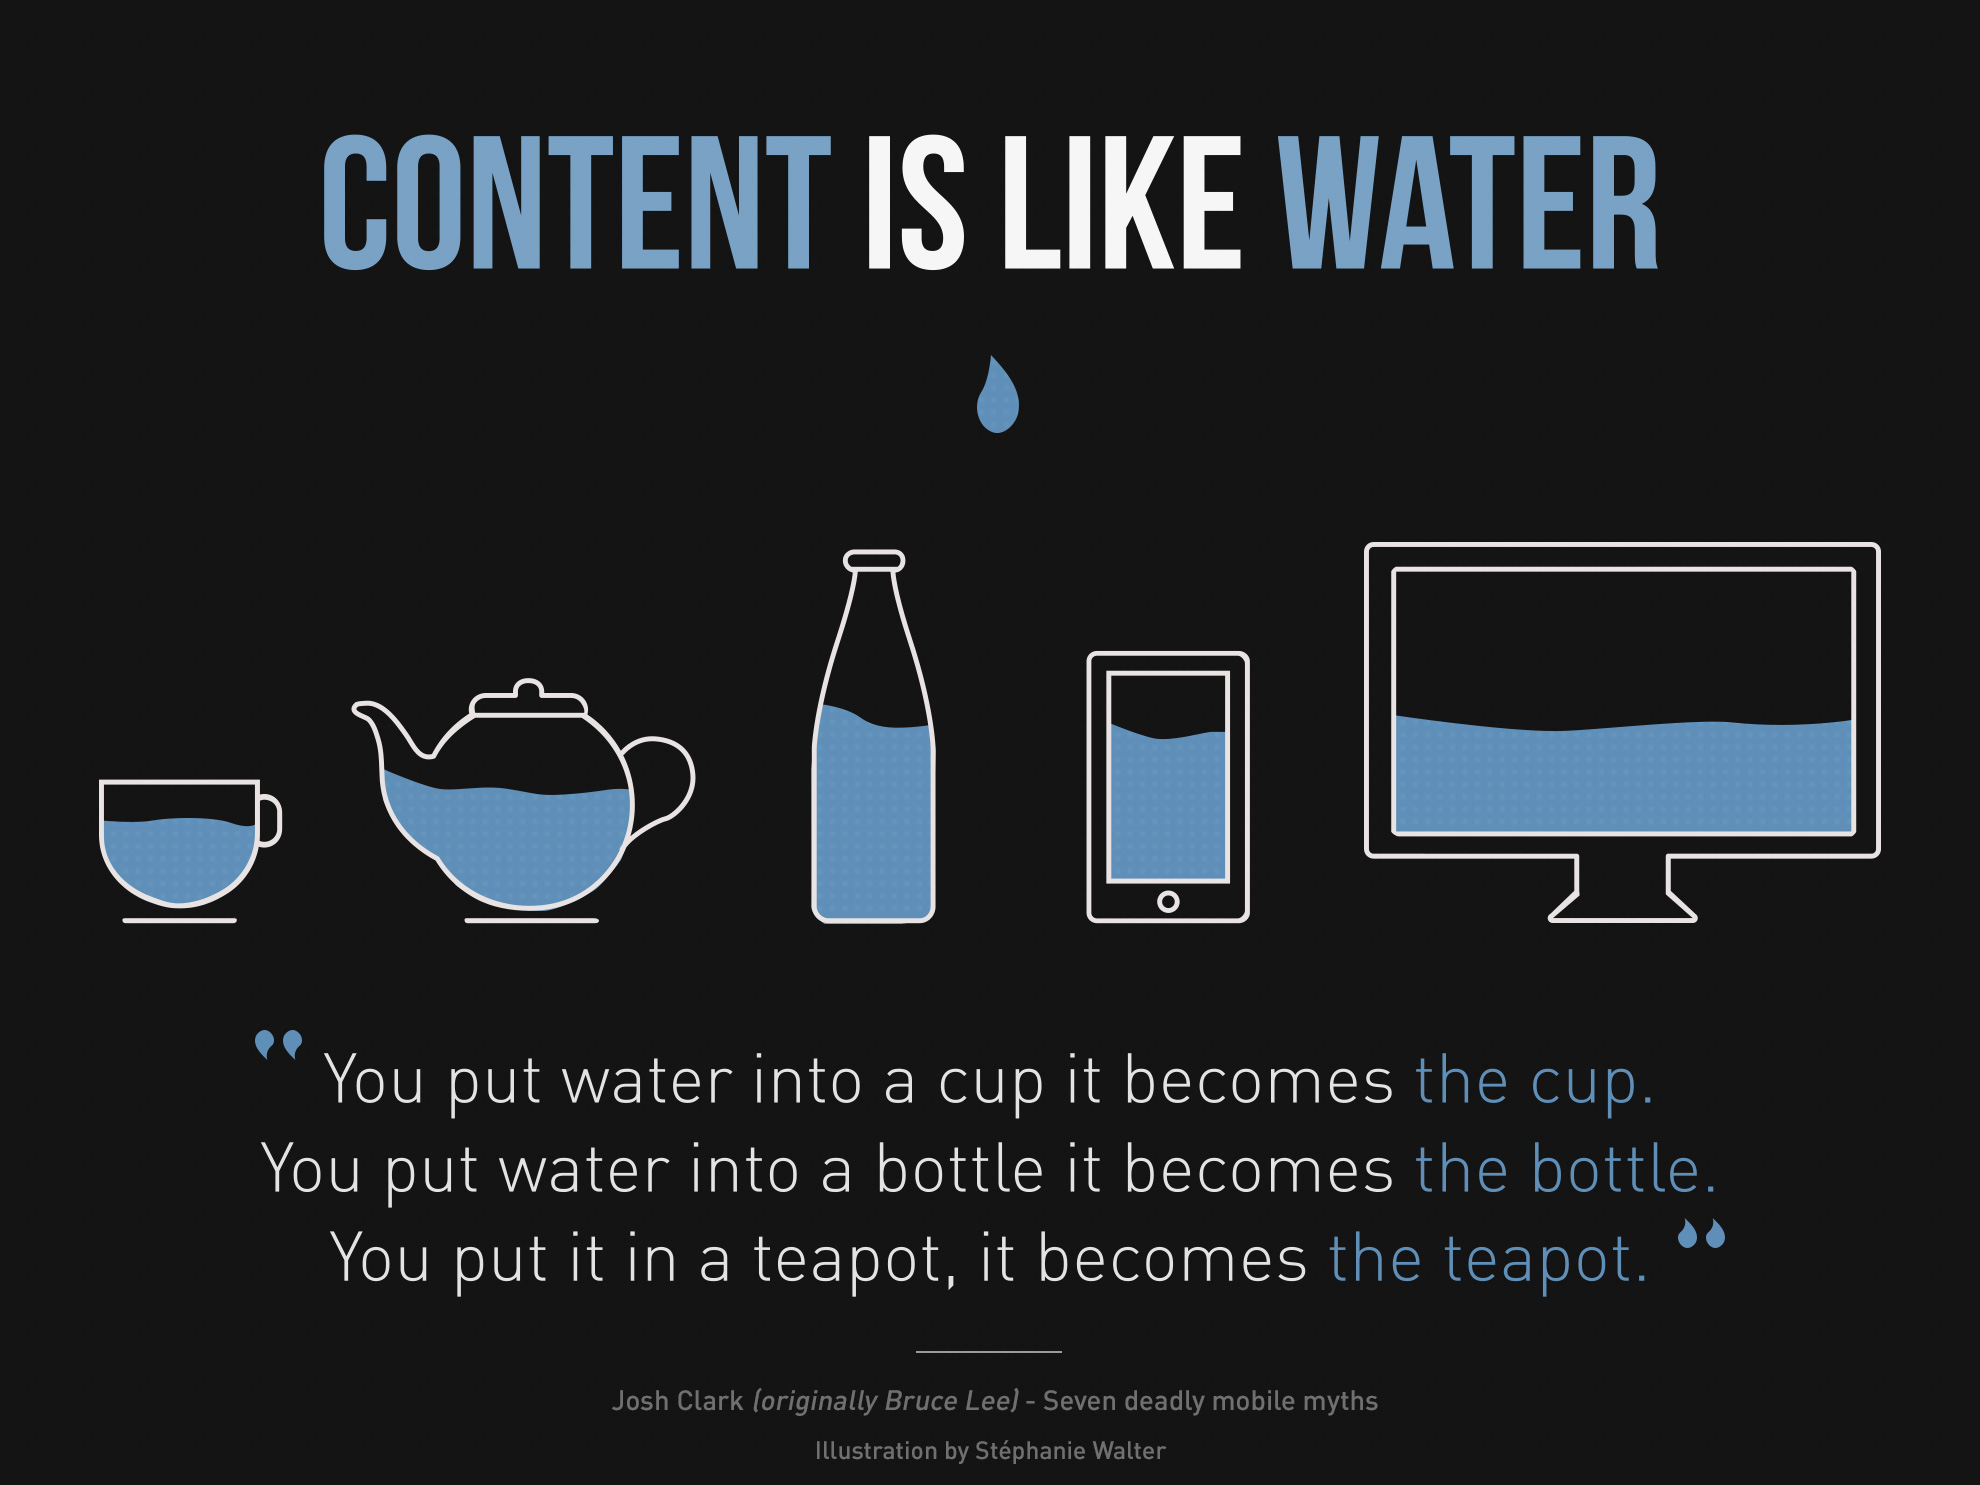 Content is like water, a saying that illustrates the principles of RWD.